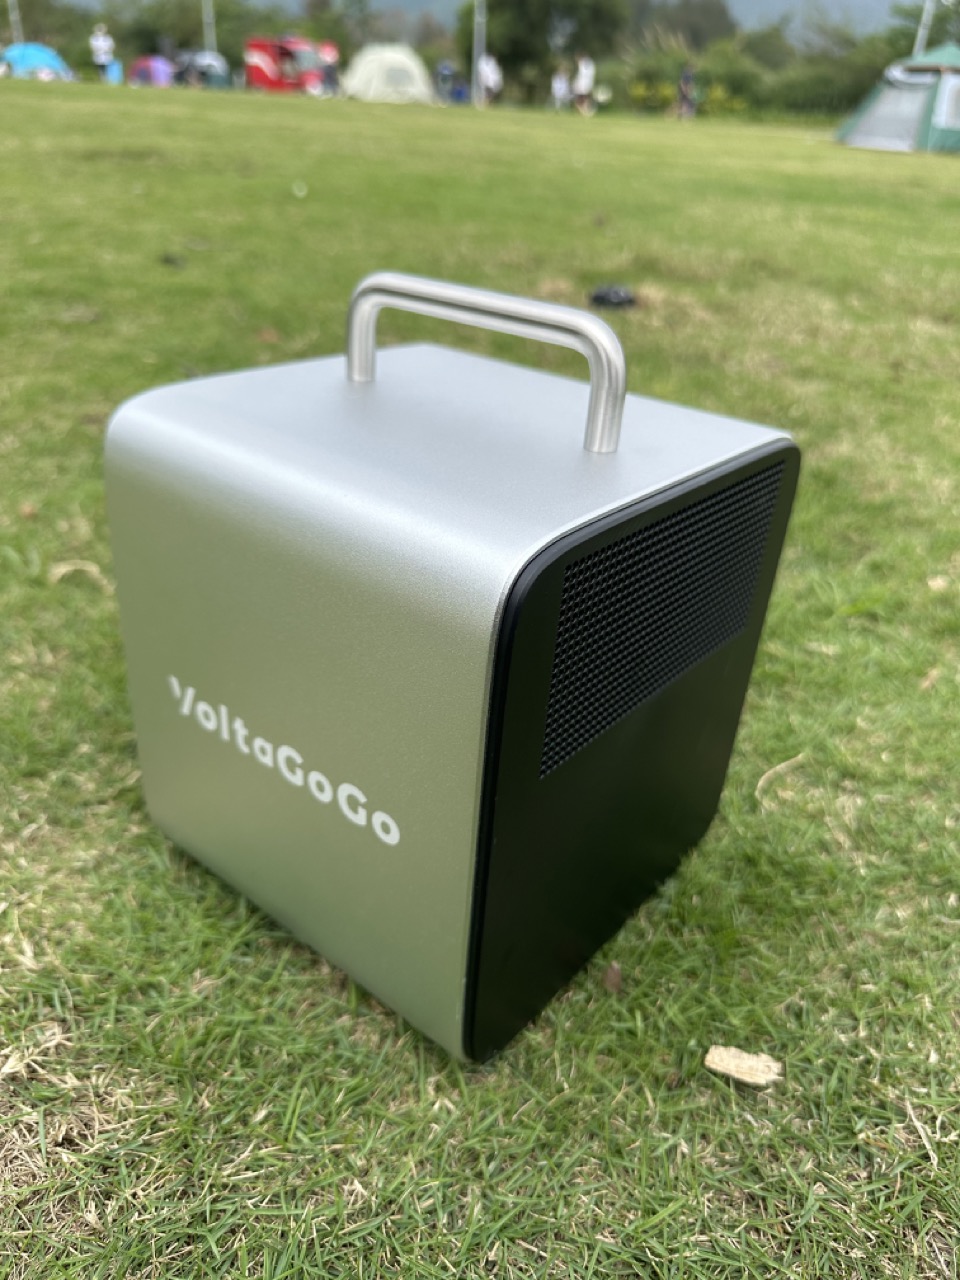 voltagogo cozy 250w rechargeable portable power station